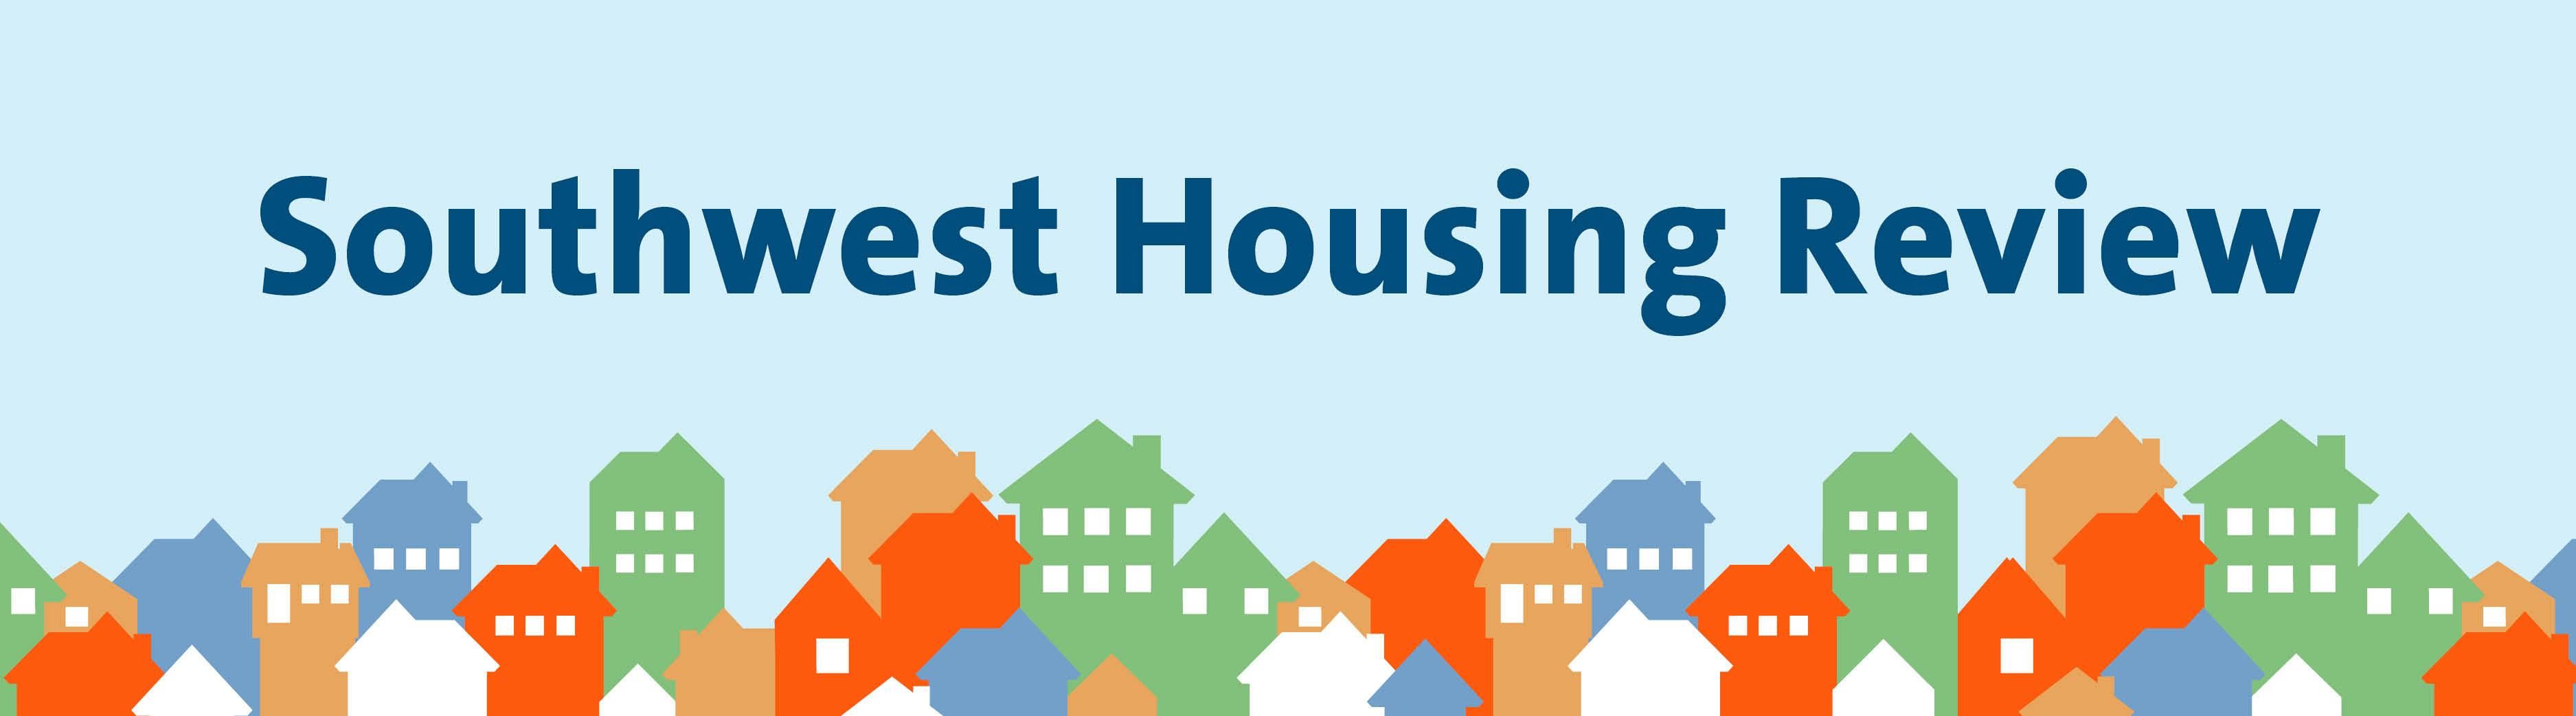 Southwest Housing Review